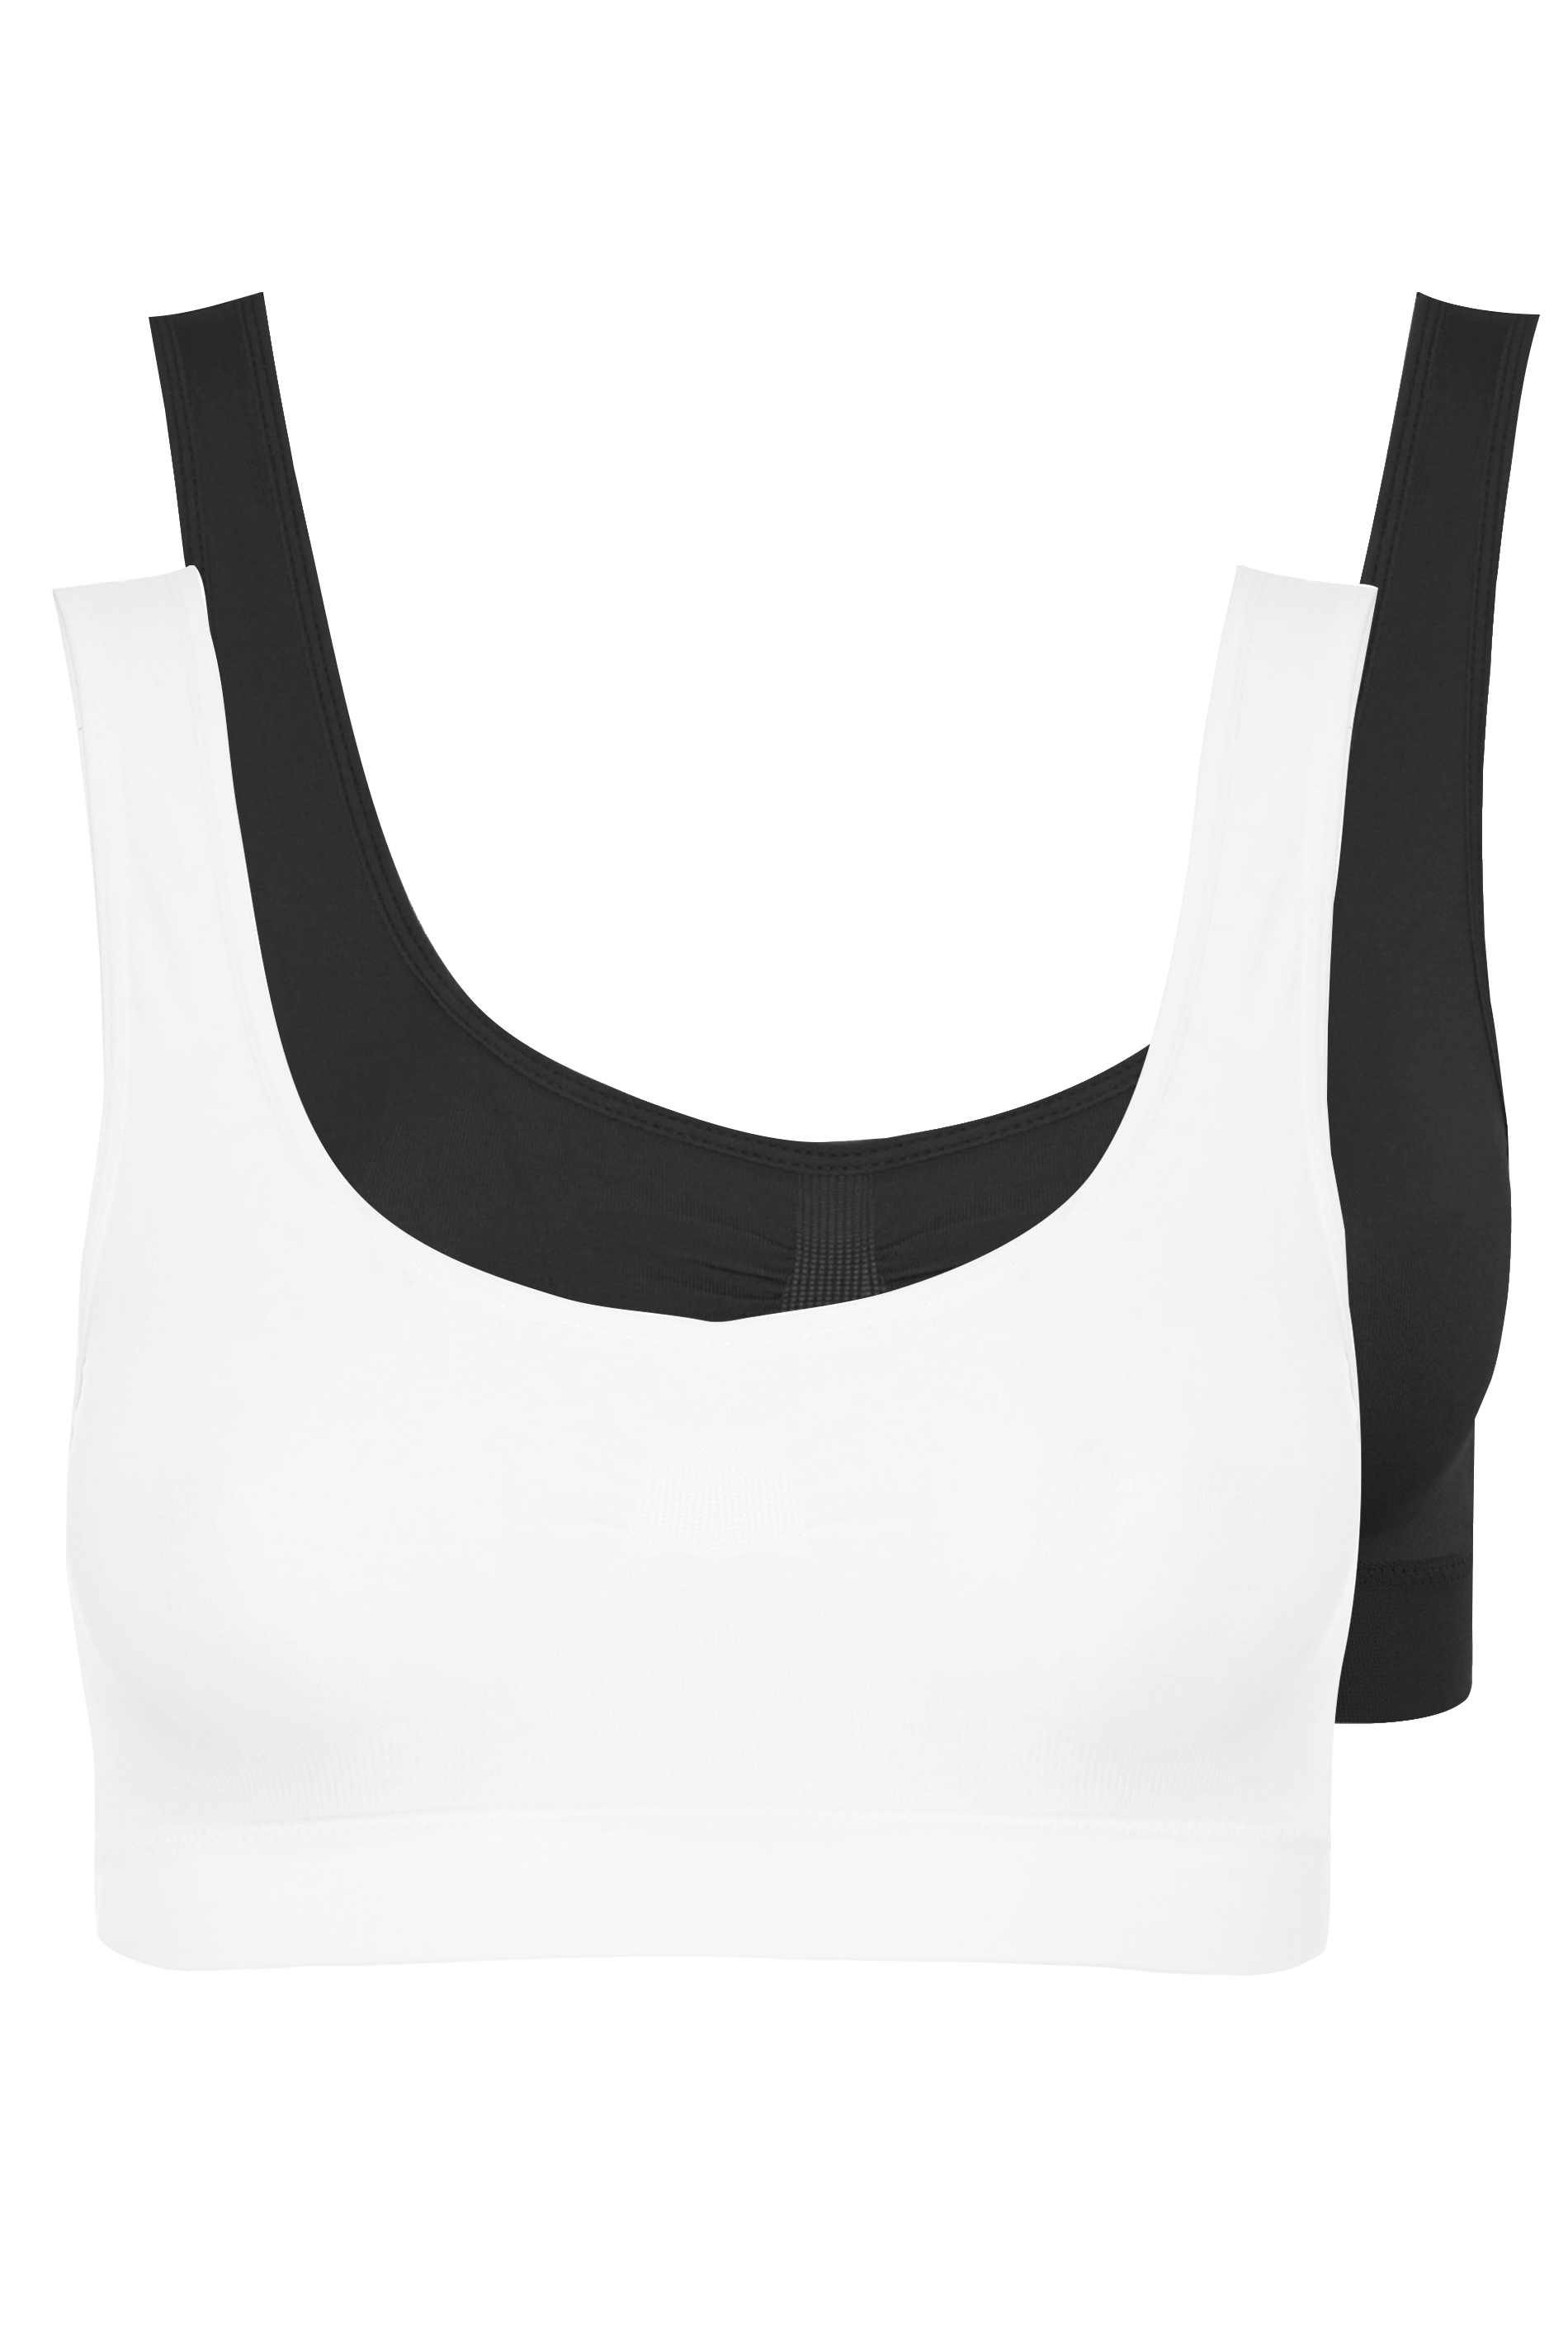 YOURS 2 PACK White & Black Seamless Padded Non-Wired Bralettes